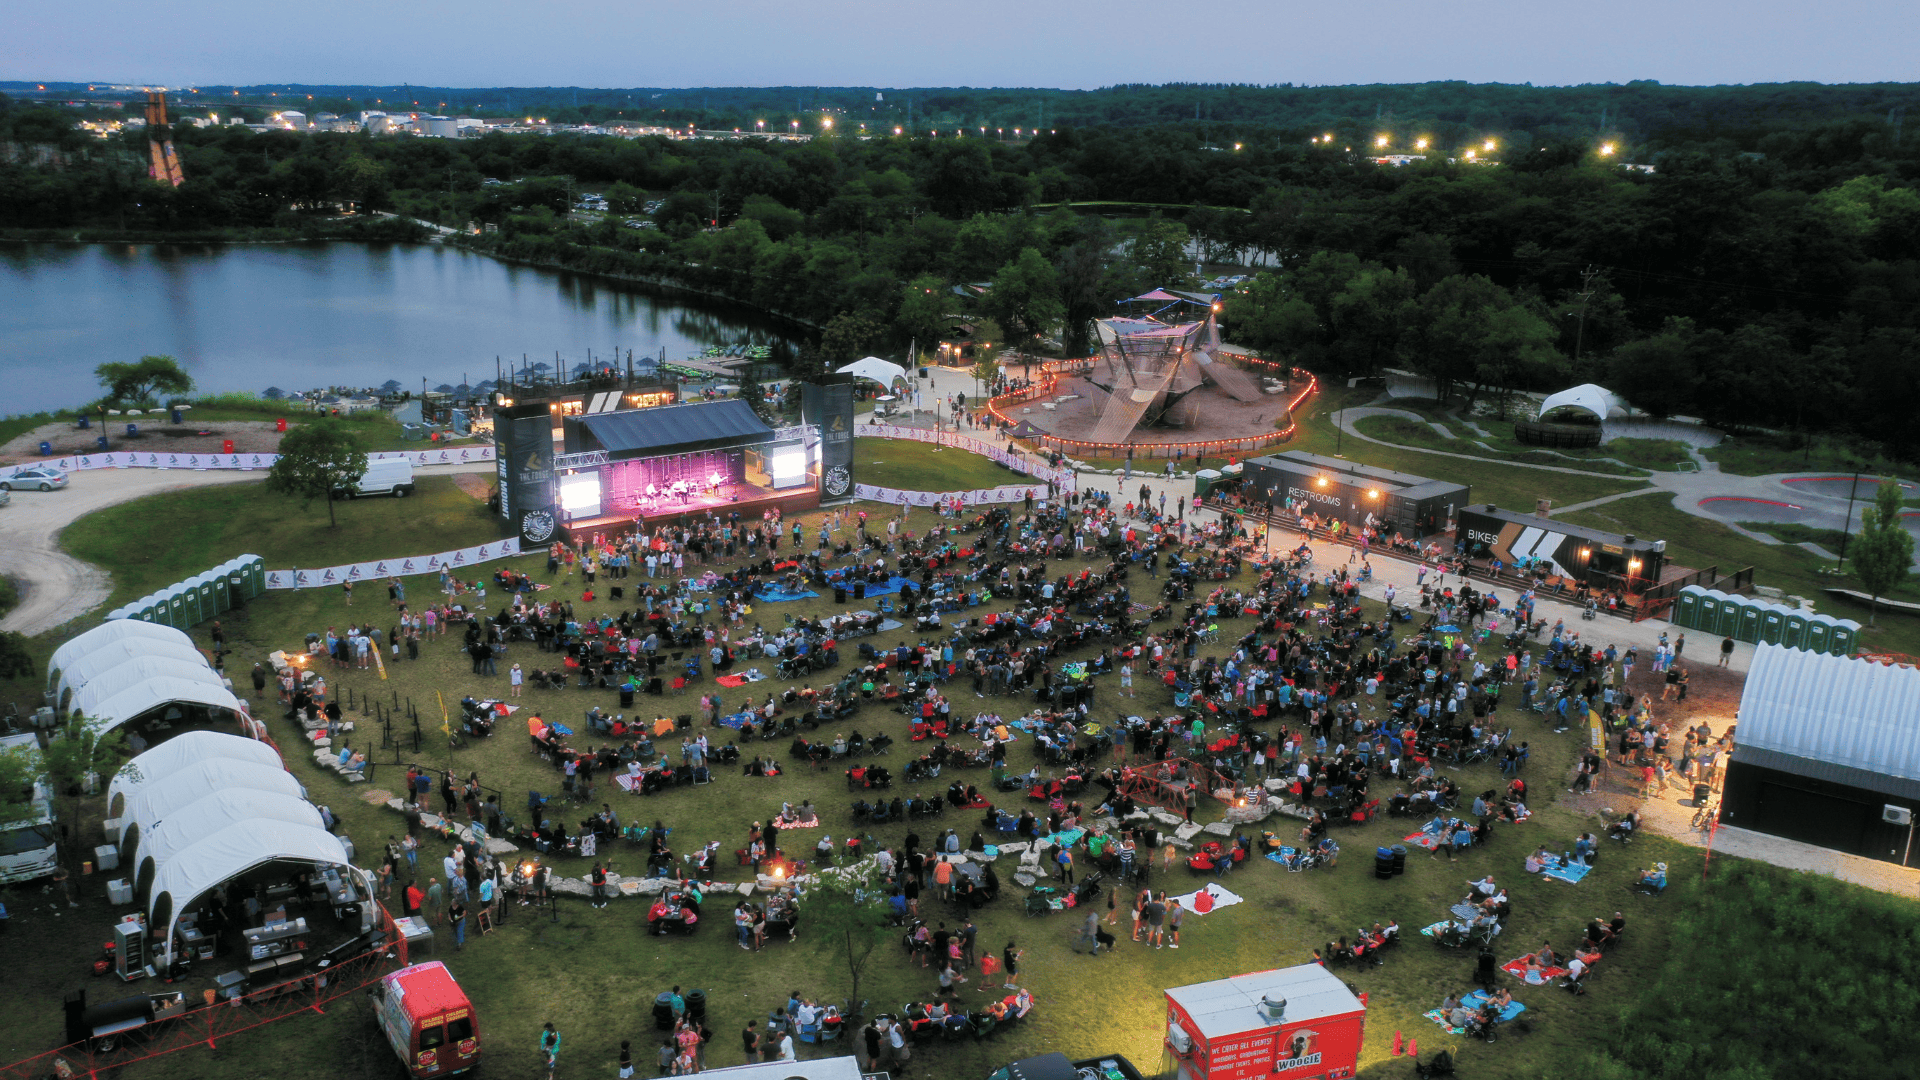 Outdoor Concerts & Live Music in Chicago Suburbs The Lemont